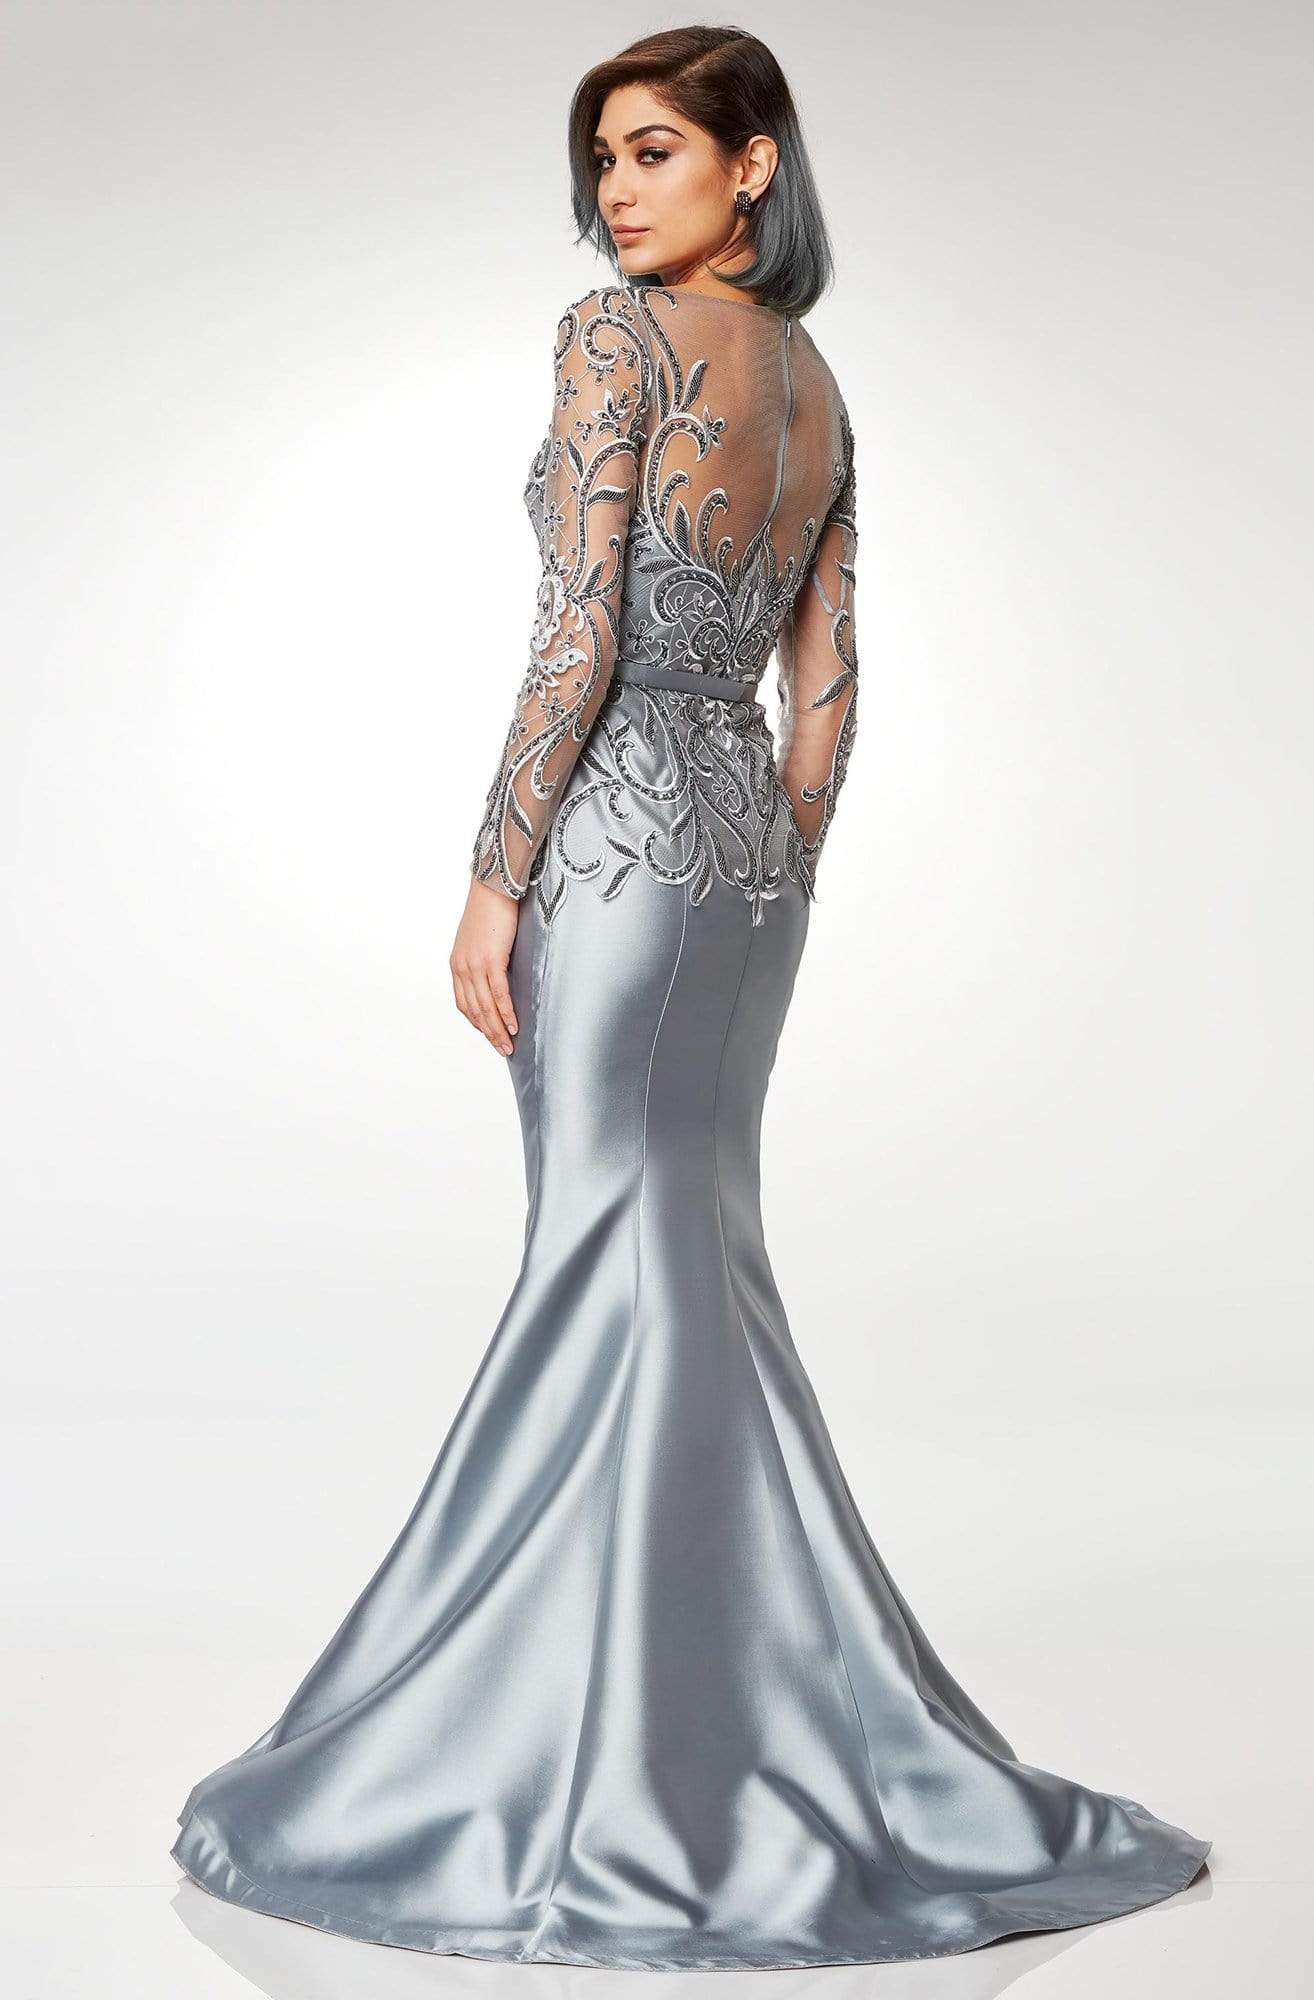 Clarisse - M6523 Embellished Illusion Bateau Mikado Mermaid Gown Special Occasion Dress